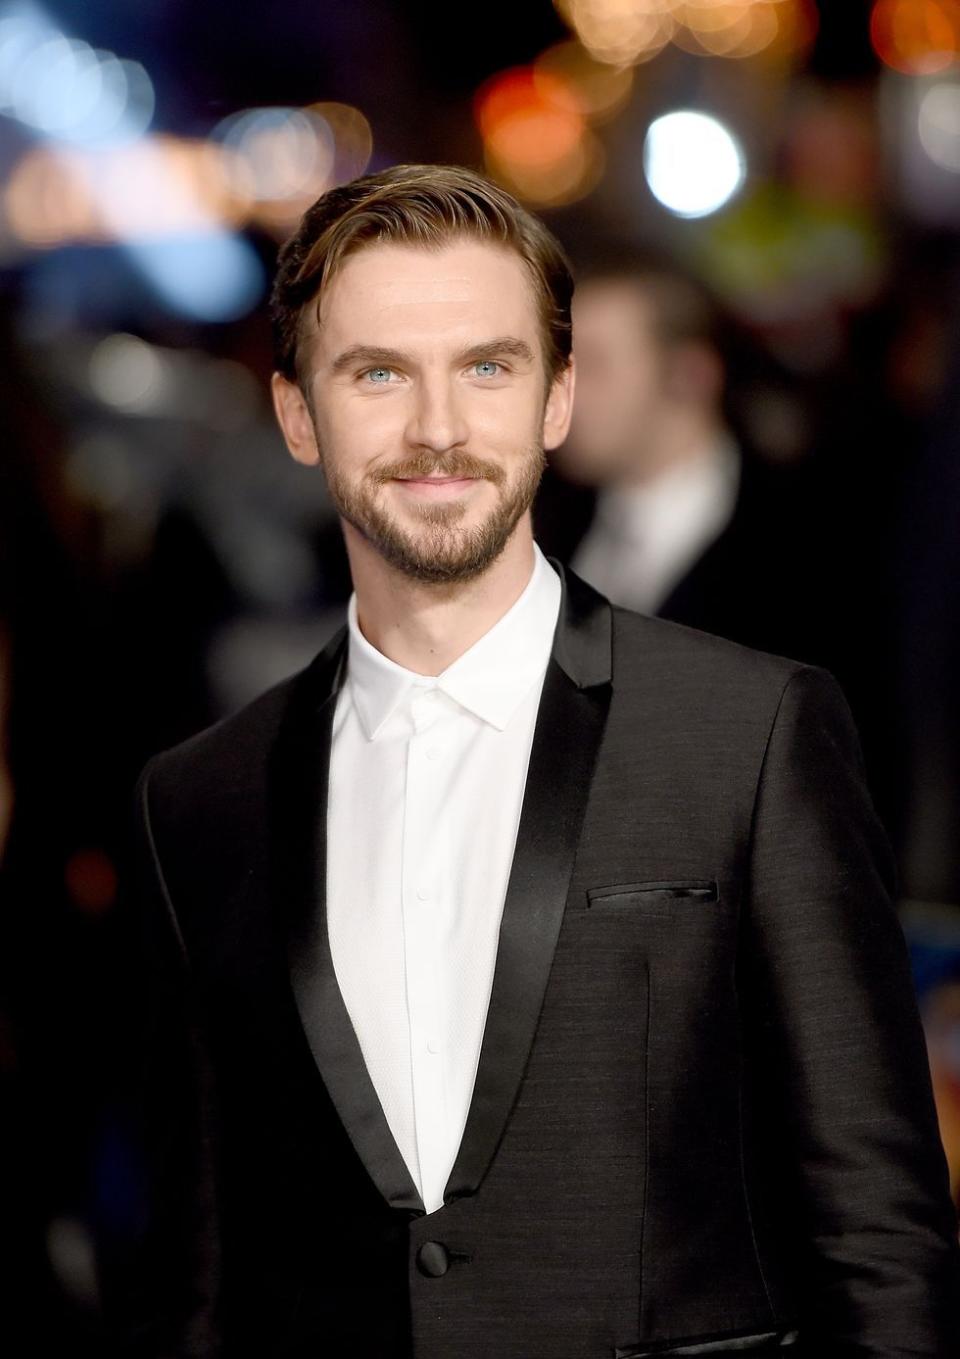 Dan Stevens was a judge for the Man Booker Prize.